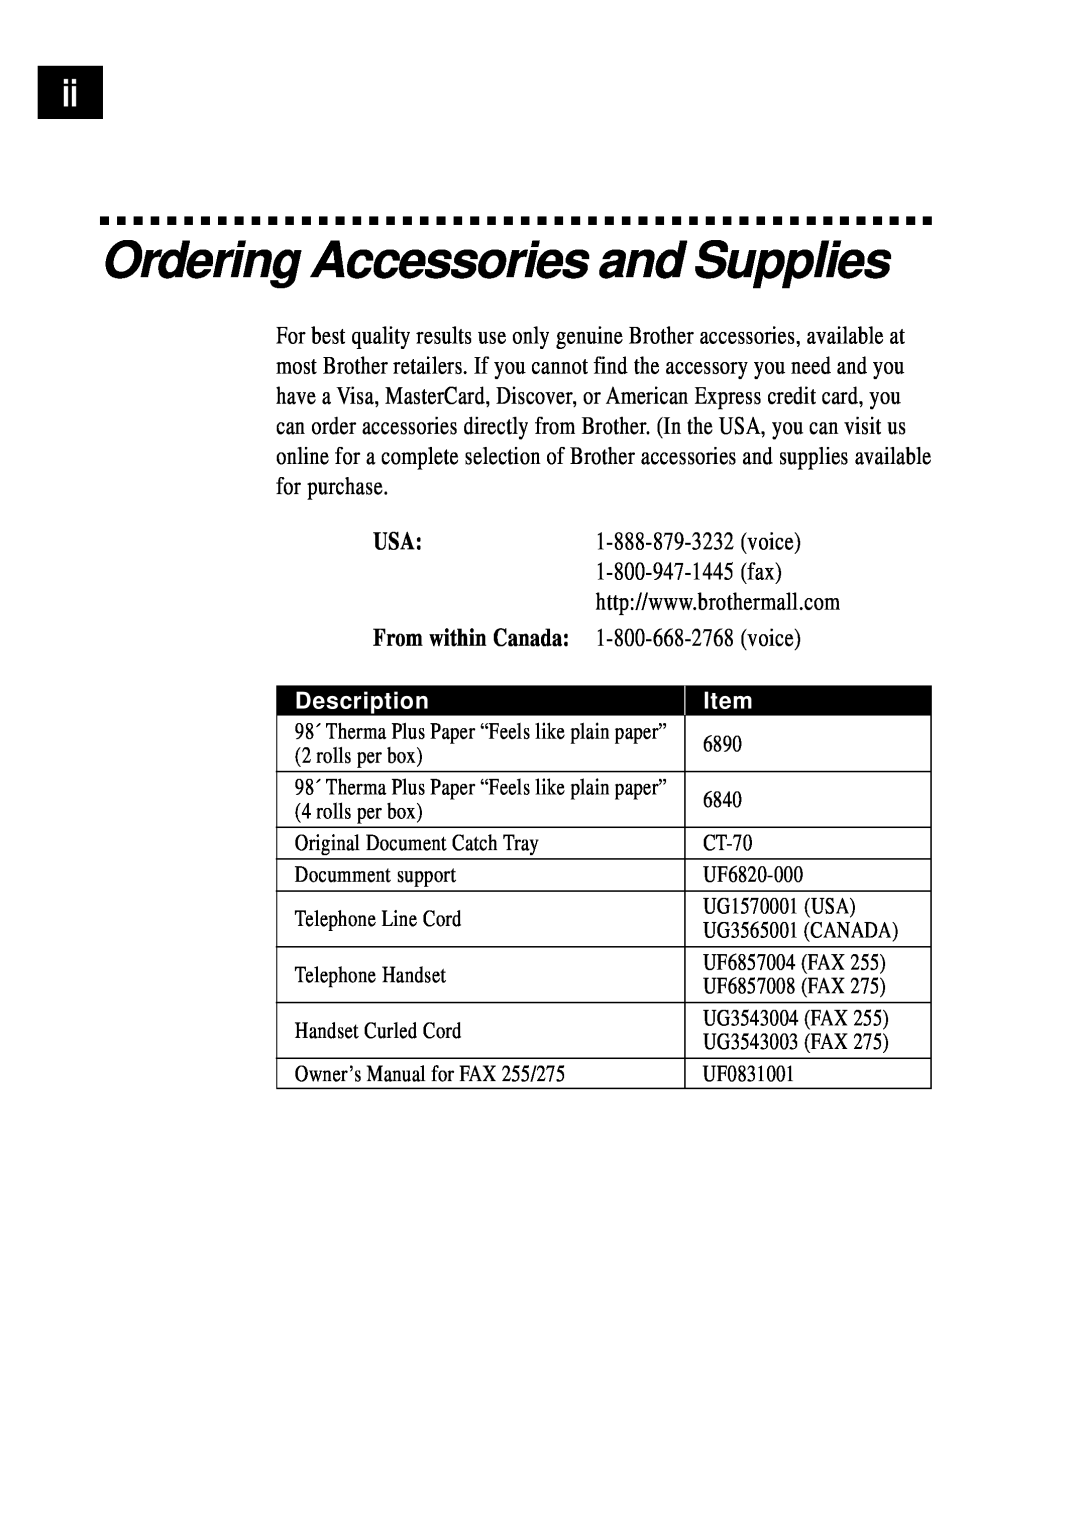 Brother FAX 255 owner manual Ordering Accessories and Supplies, From within Canada, Description 